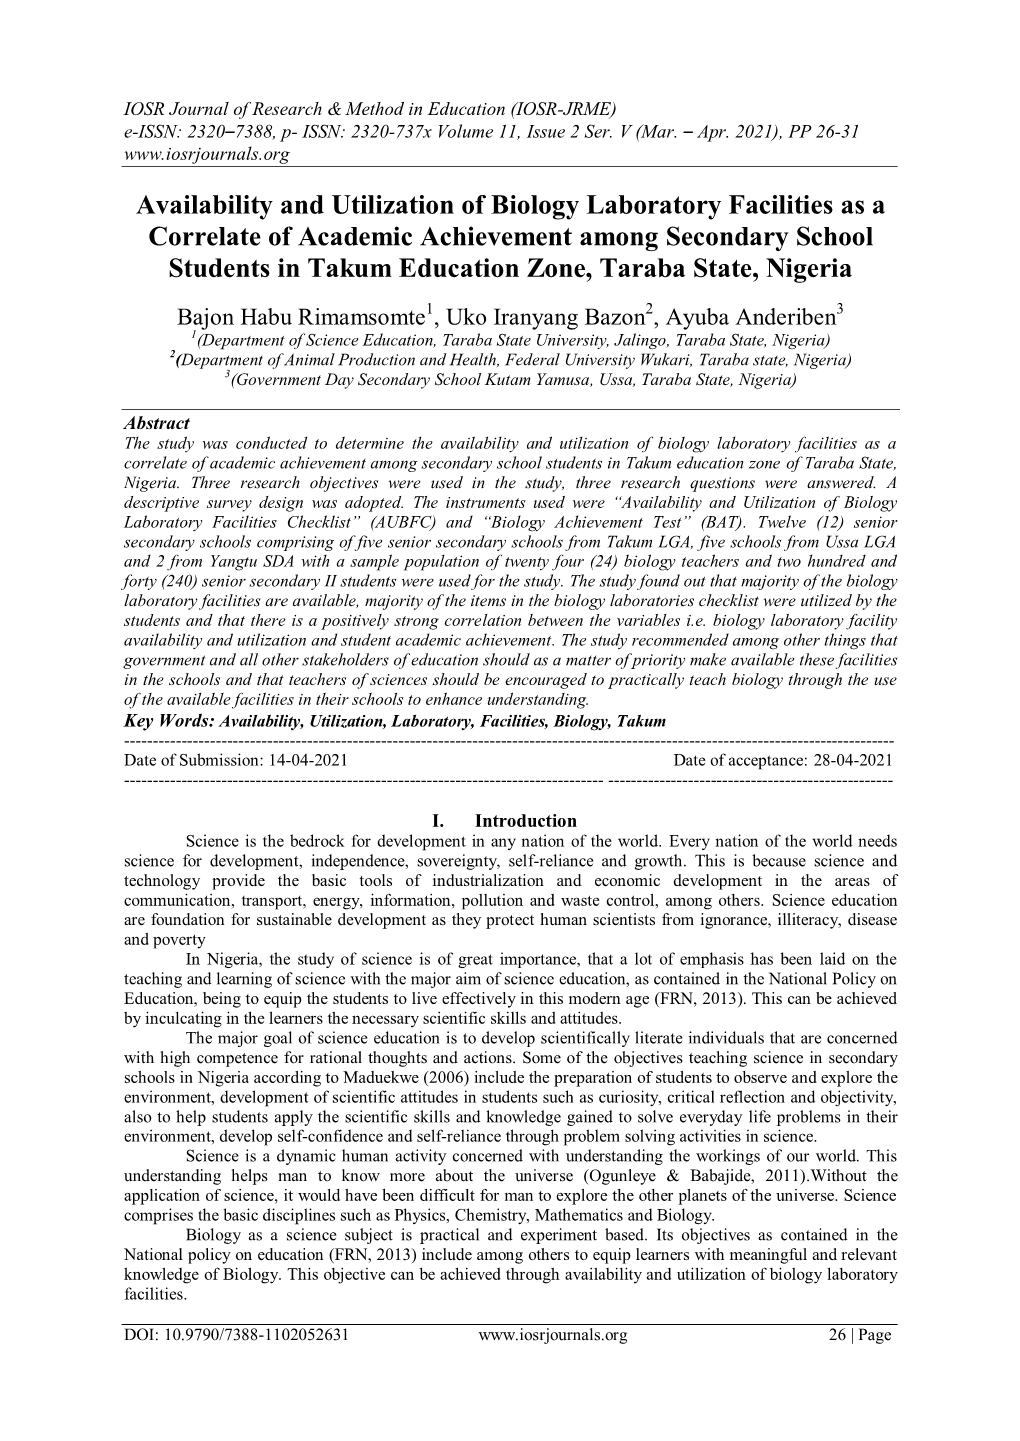 Availability and Utilization of Biology Laboratory Facilities As a Correlate